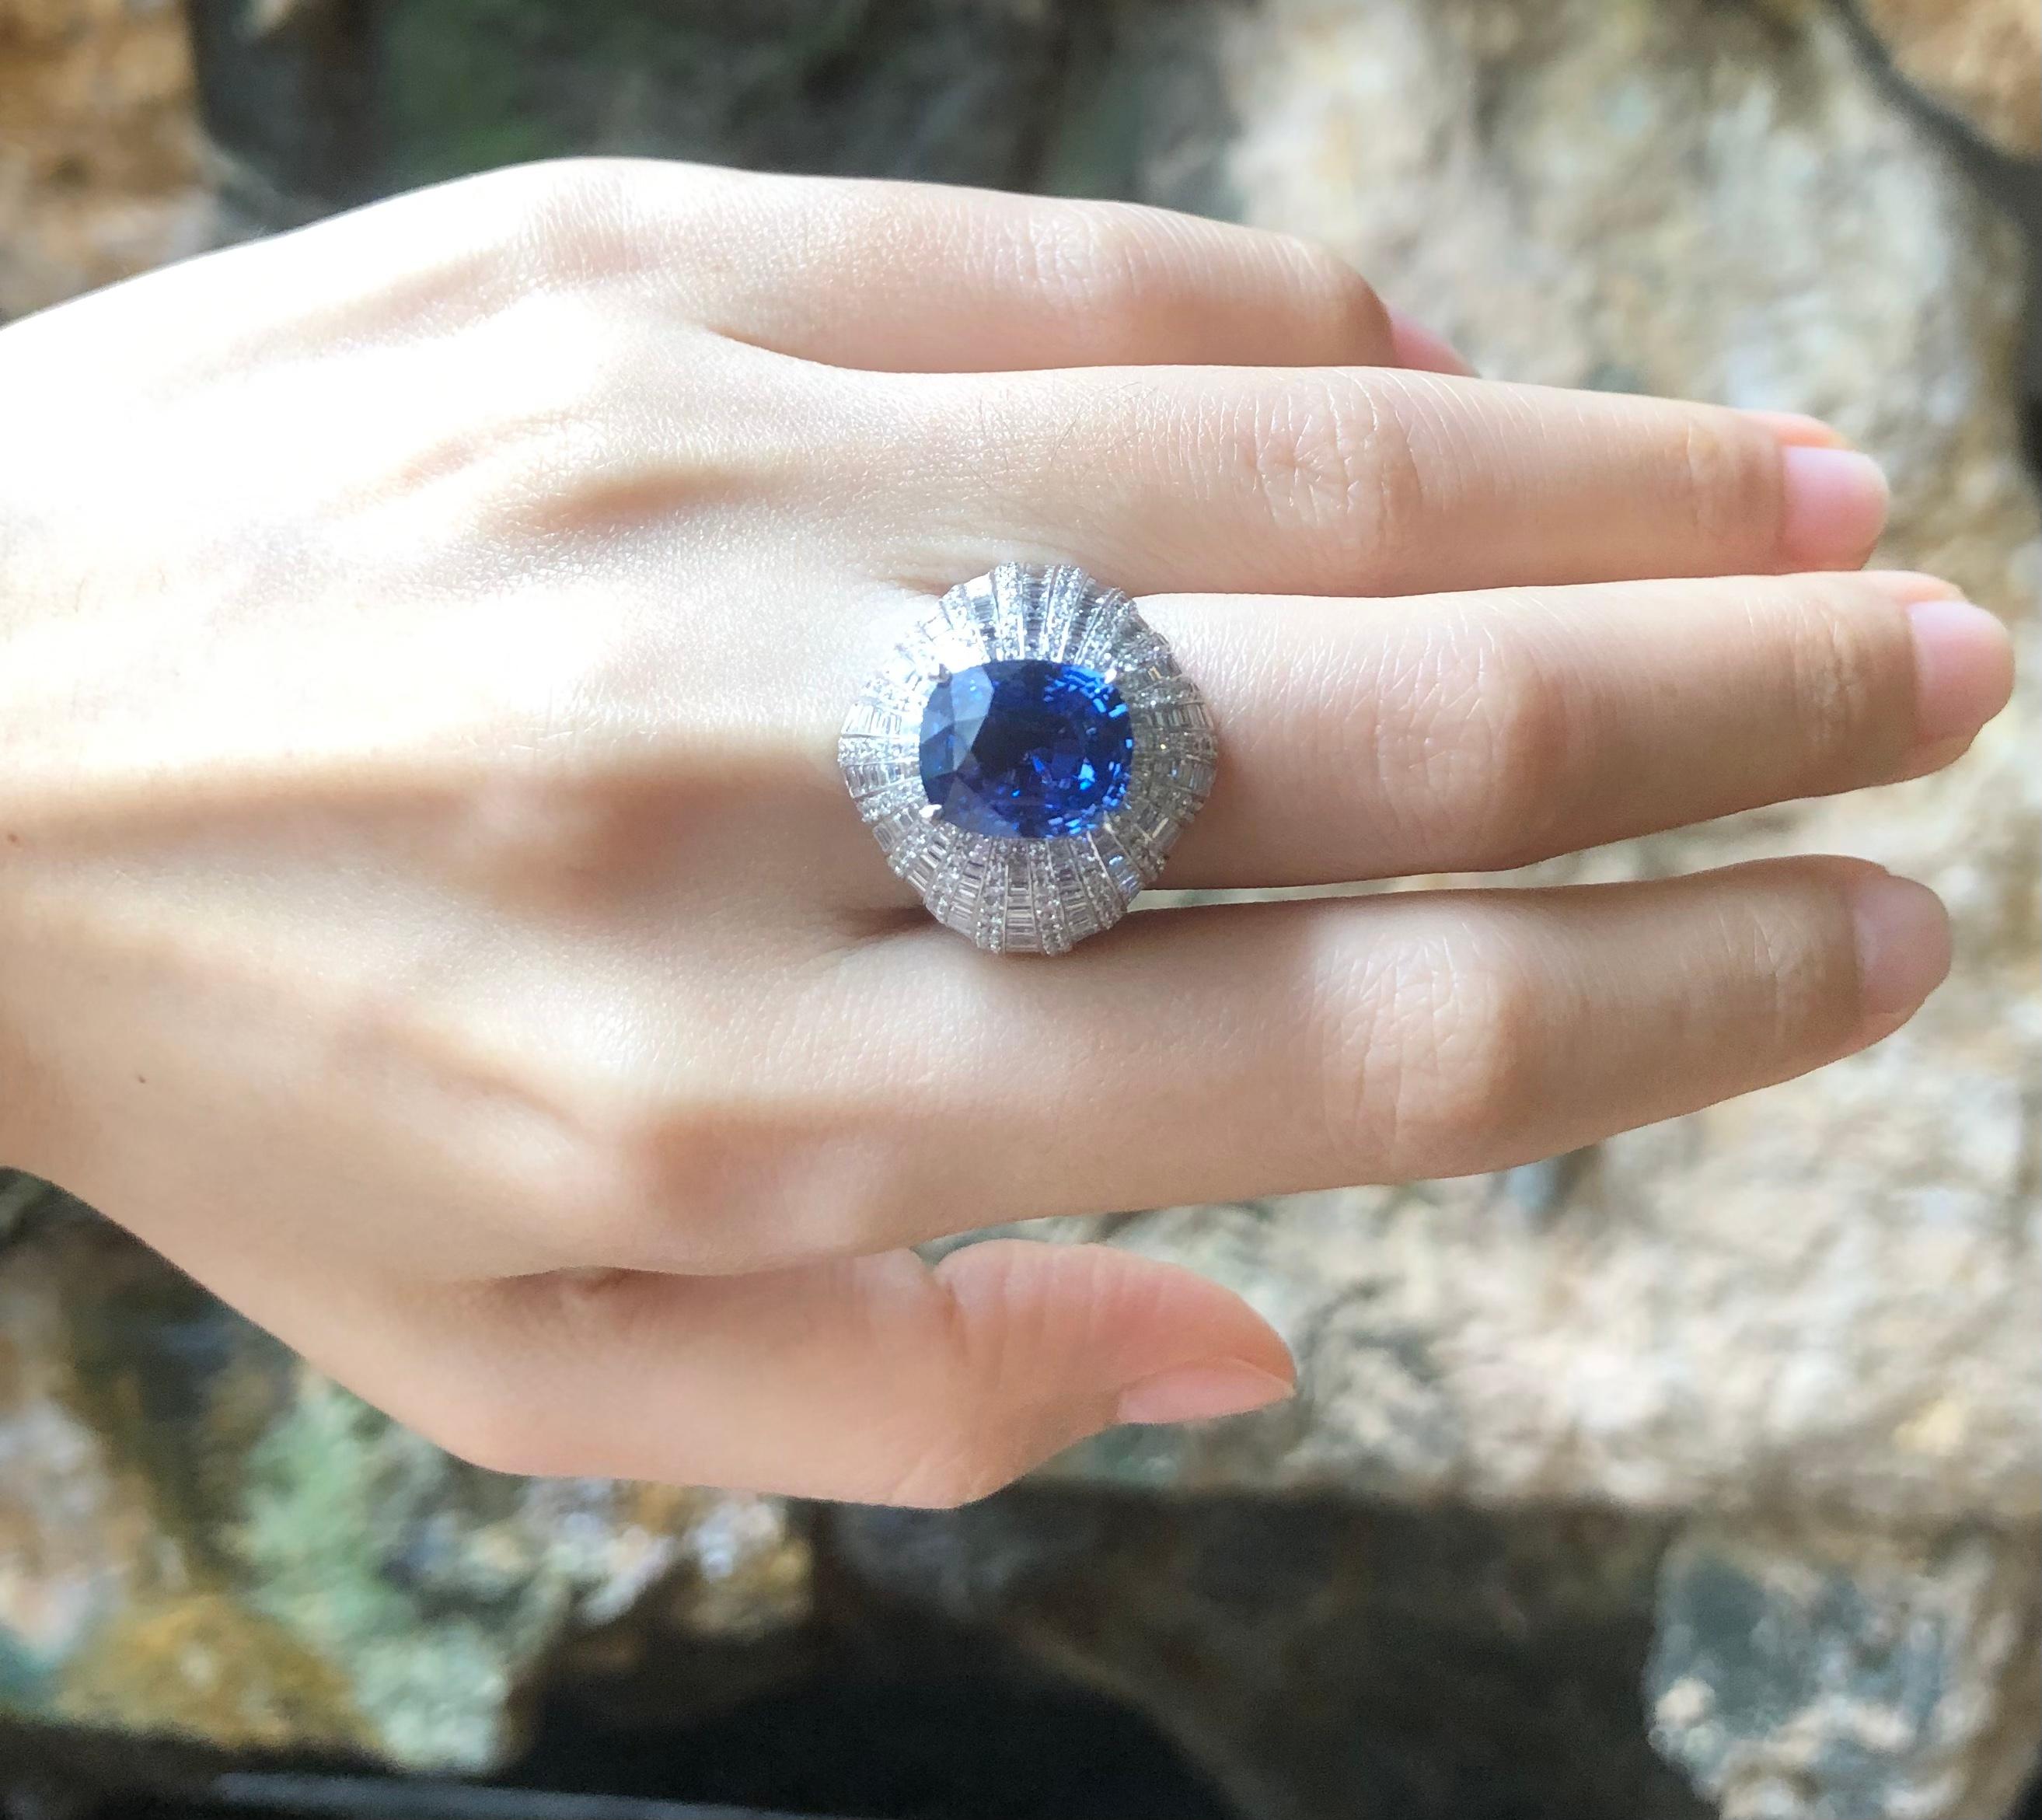 Blue Sapphire 8.03 carats with Diamond 4.32 carats Ring set in 18 Karat White Gold Settings
(GIA Certified)

Width:  0.9 cm 
Length: 1.1 cm
Ring Size: 54
Total Weight: 17.71 grams


